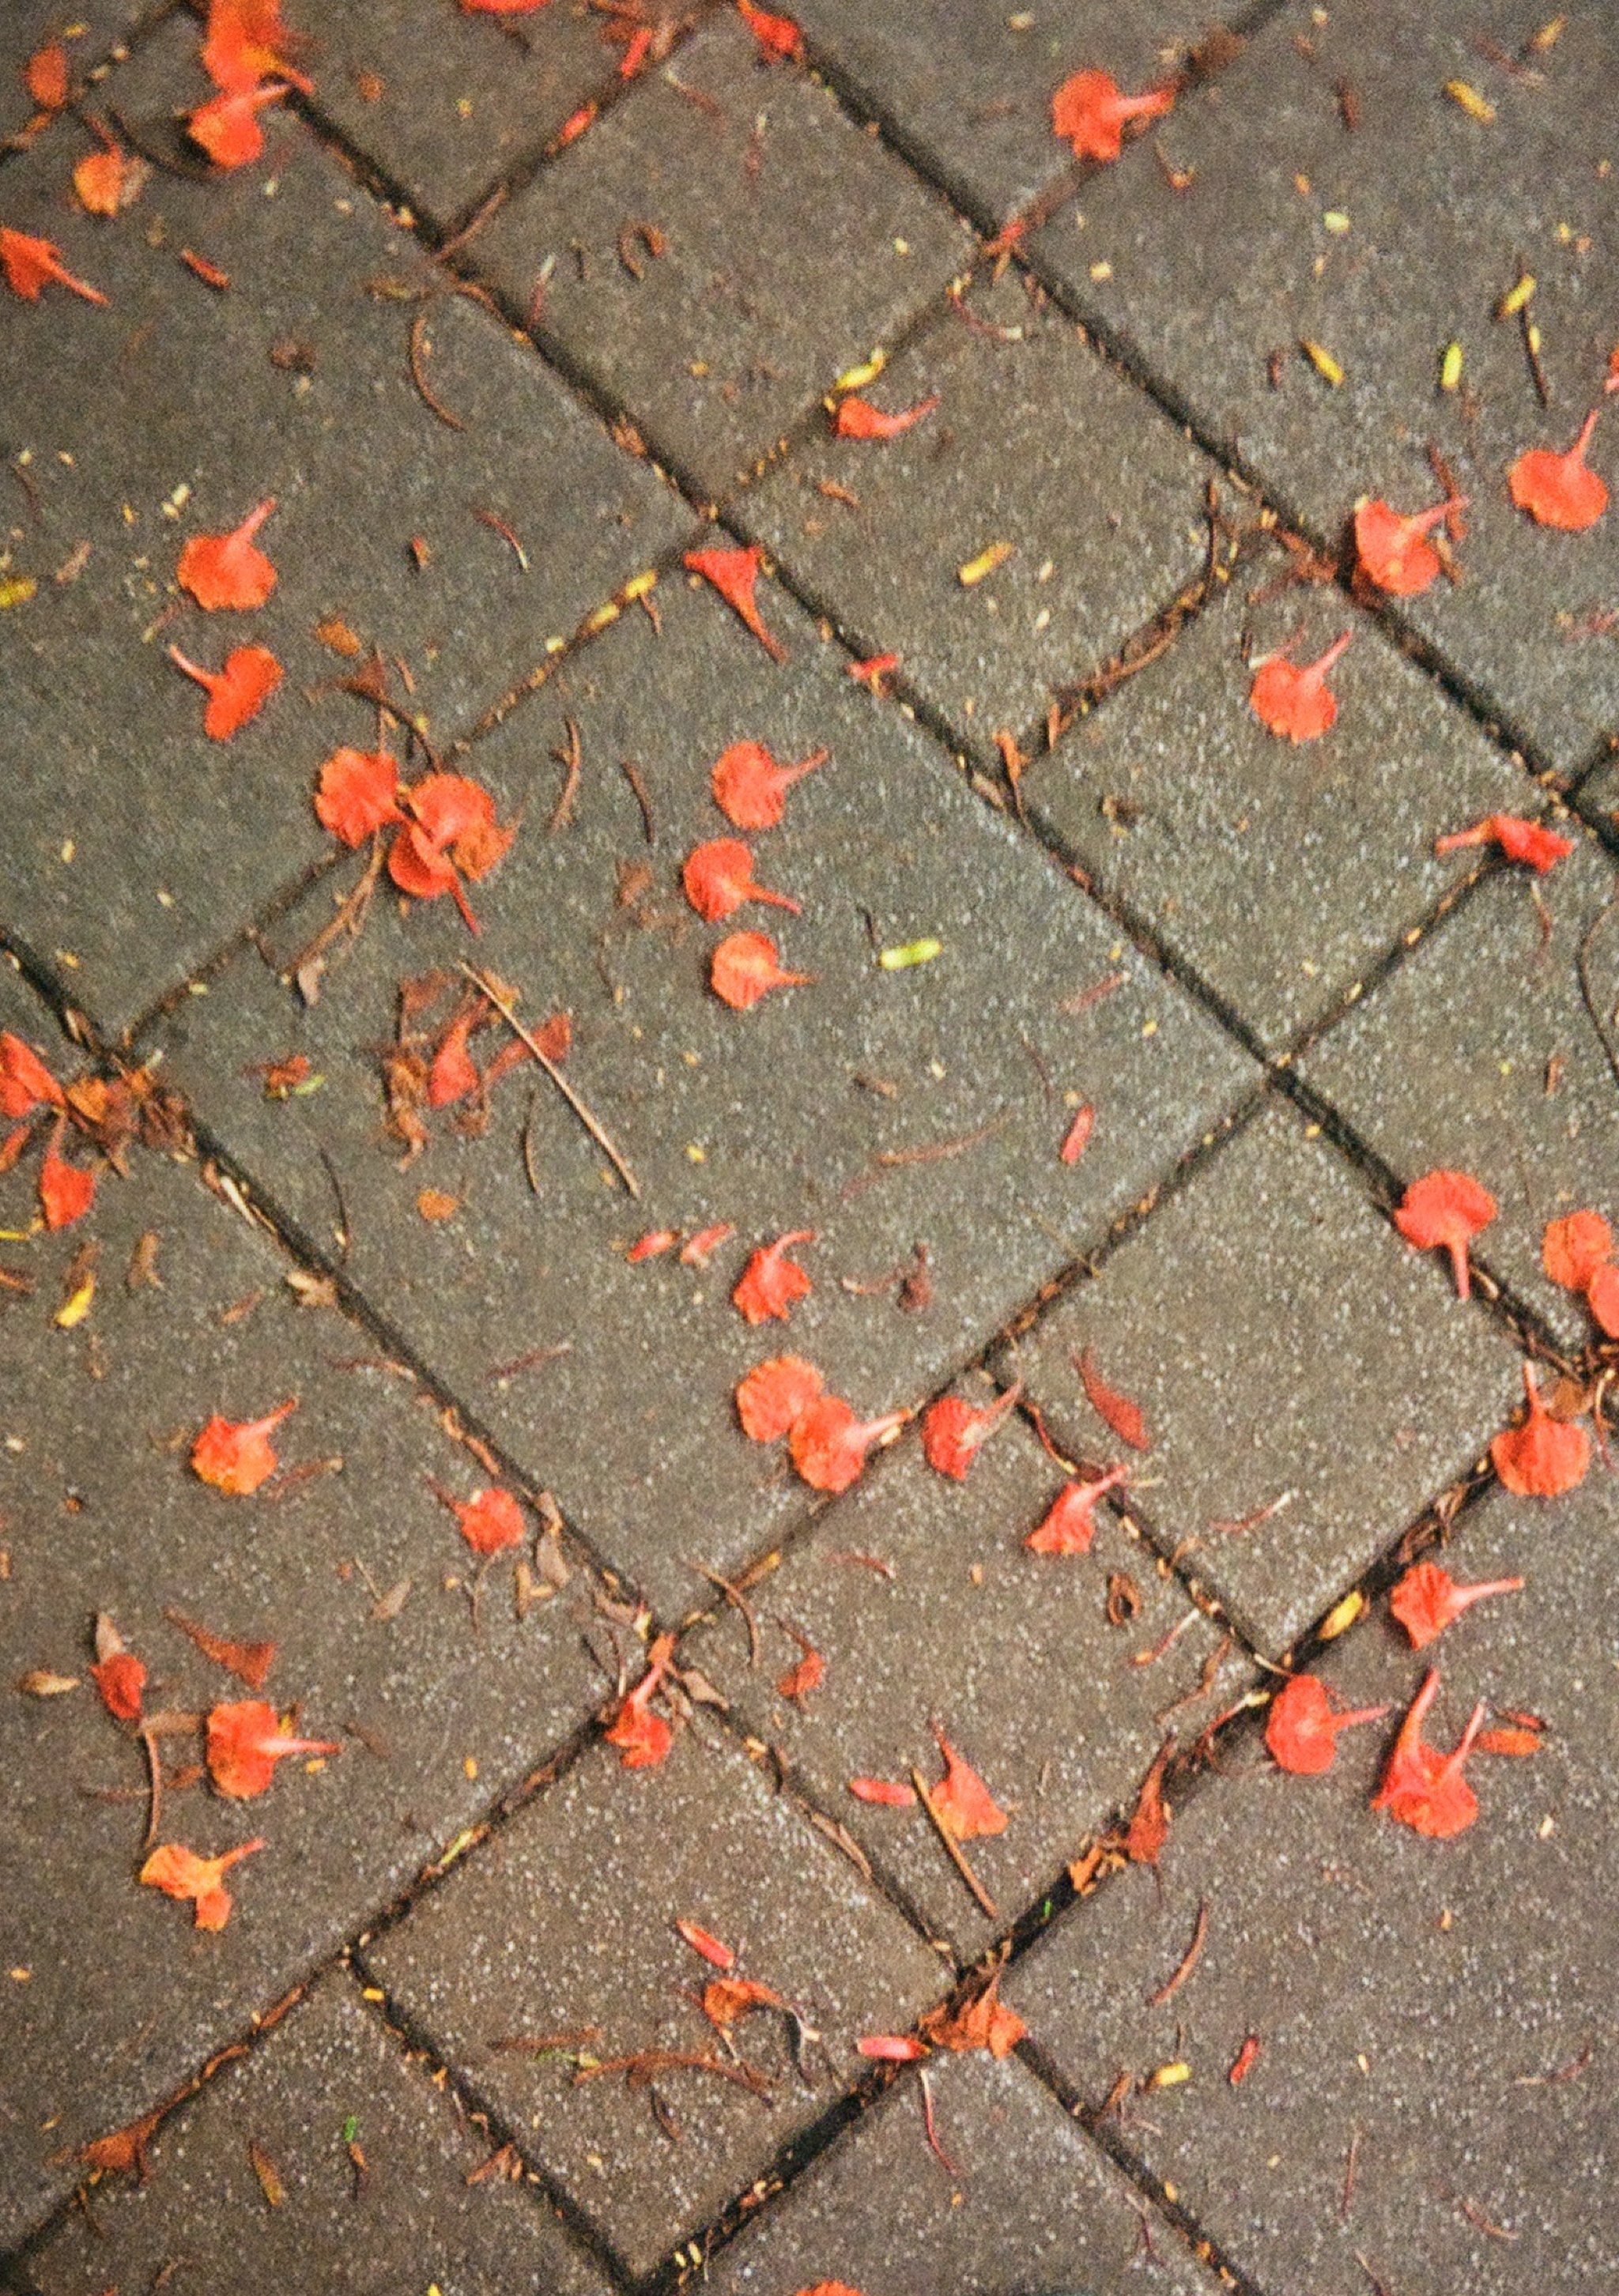 Flower pedals on the ground